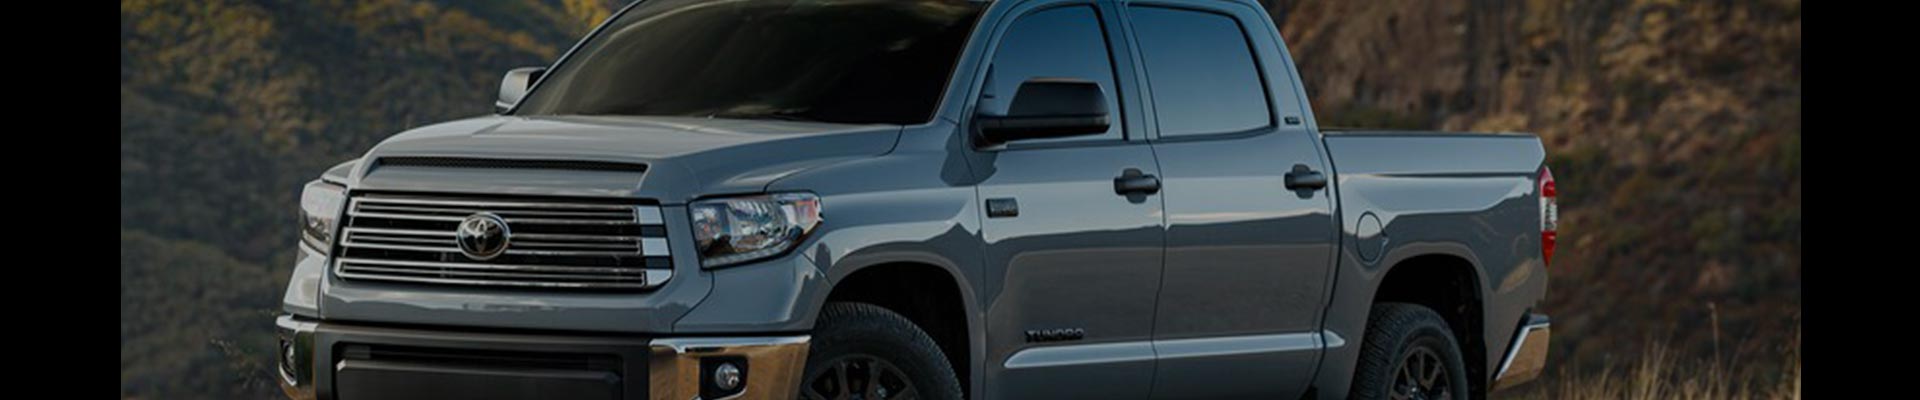 Shop Replacement and OEM 2019 Toyota Tundra Parts with Discounted Price on the Net